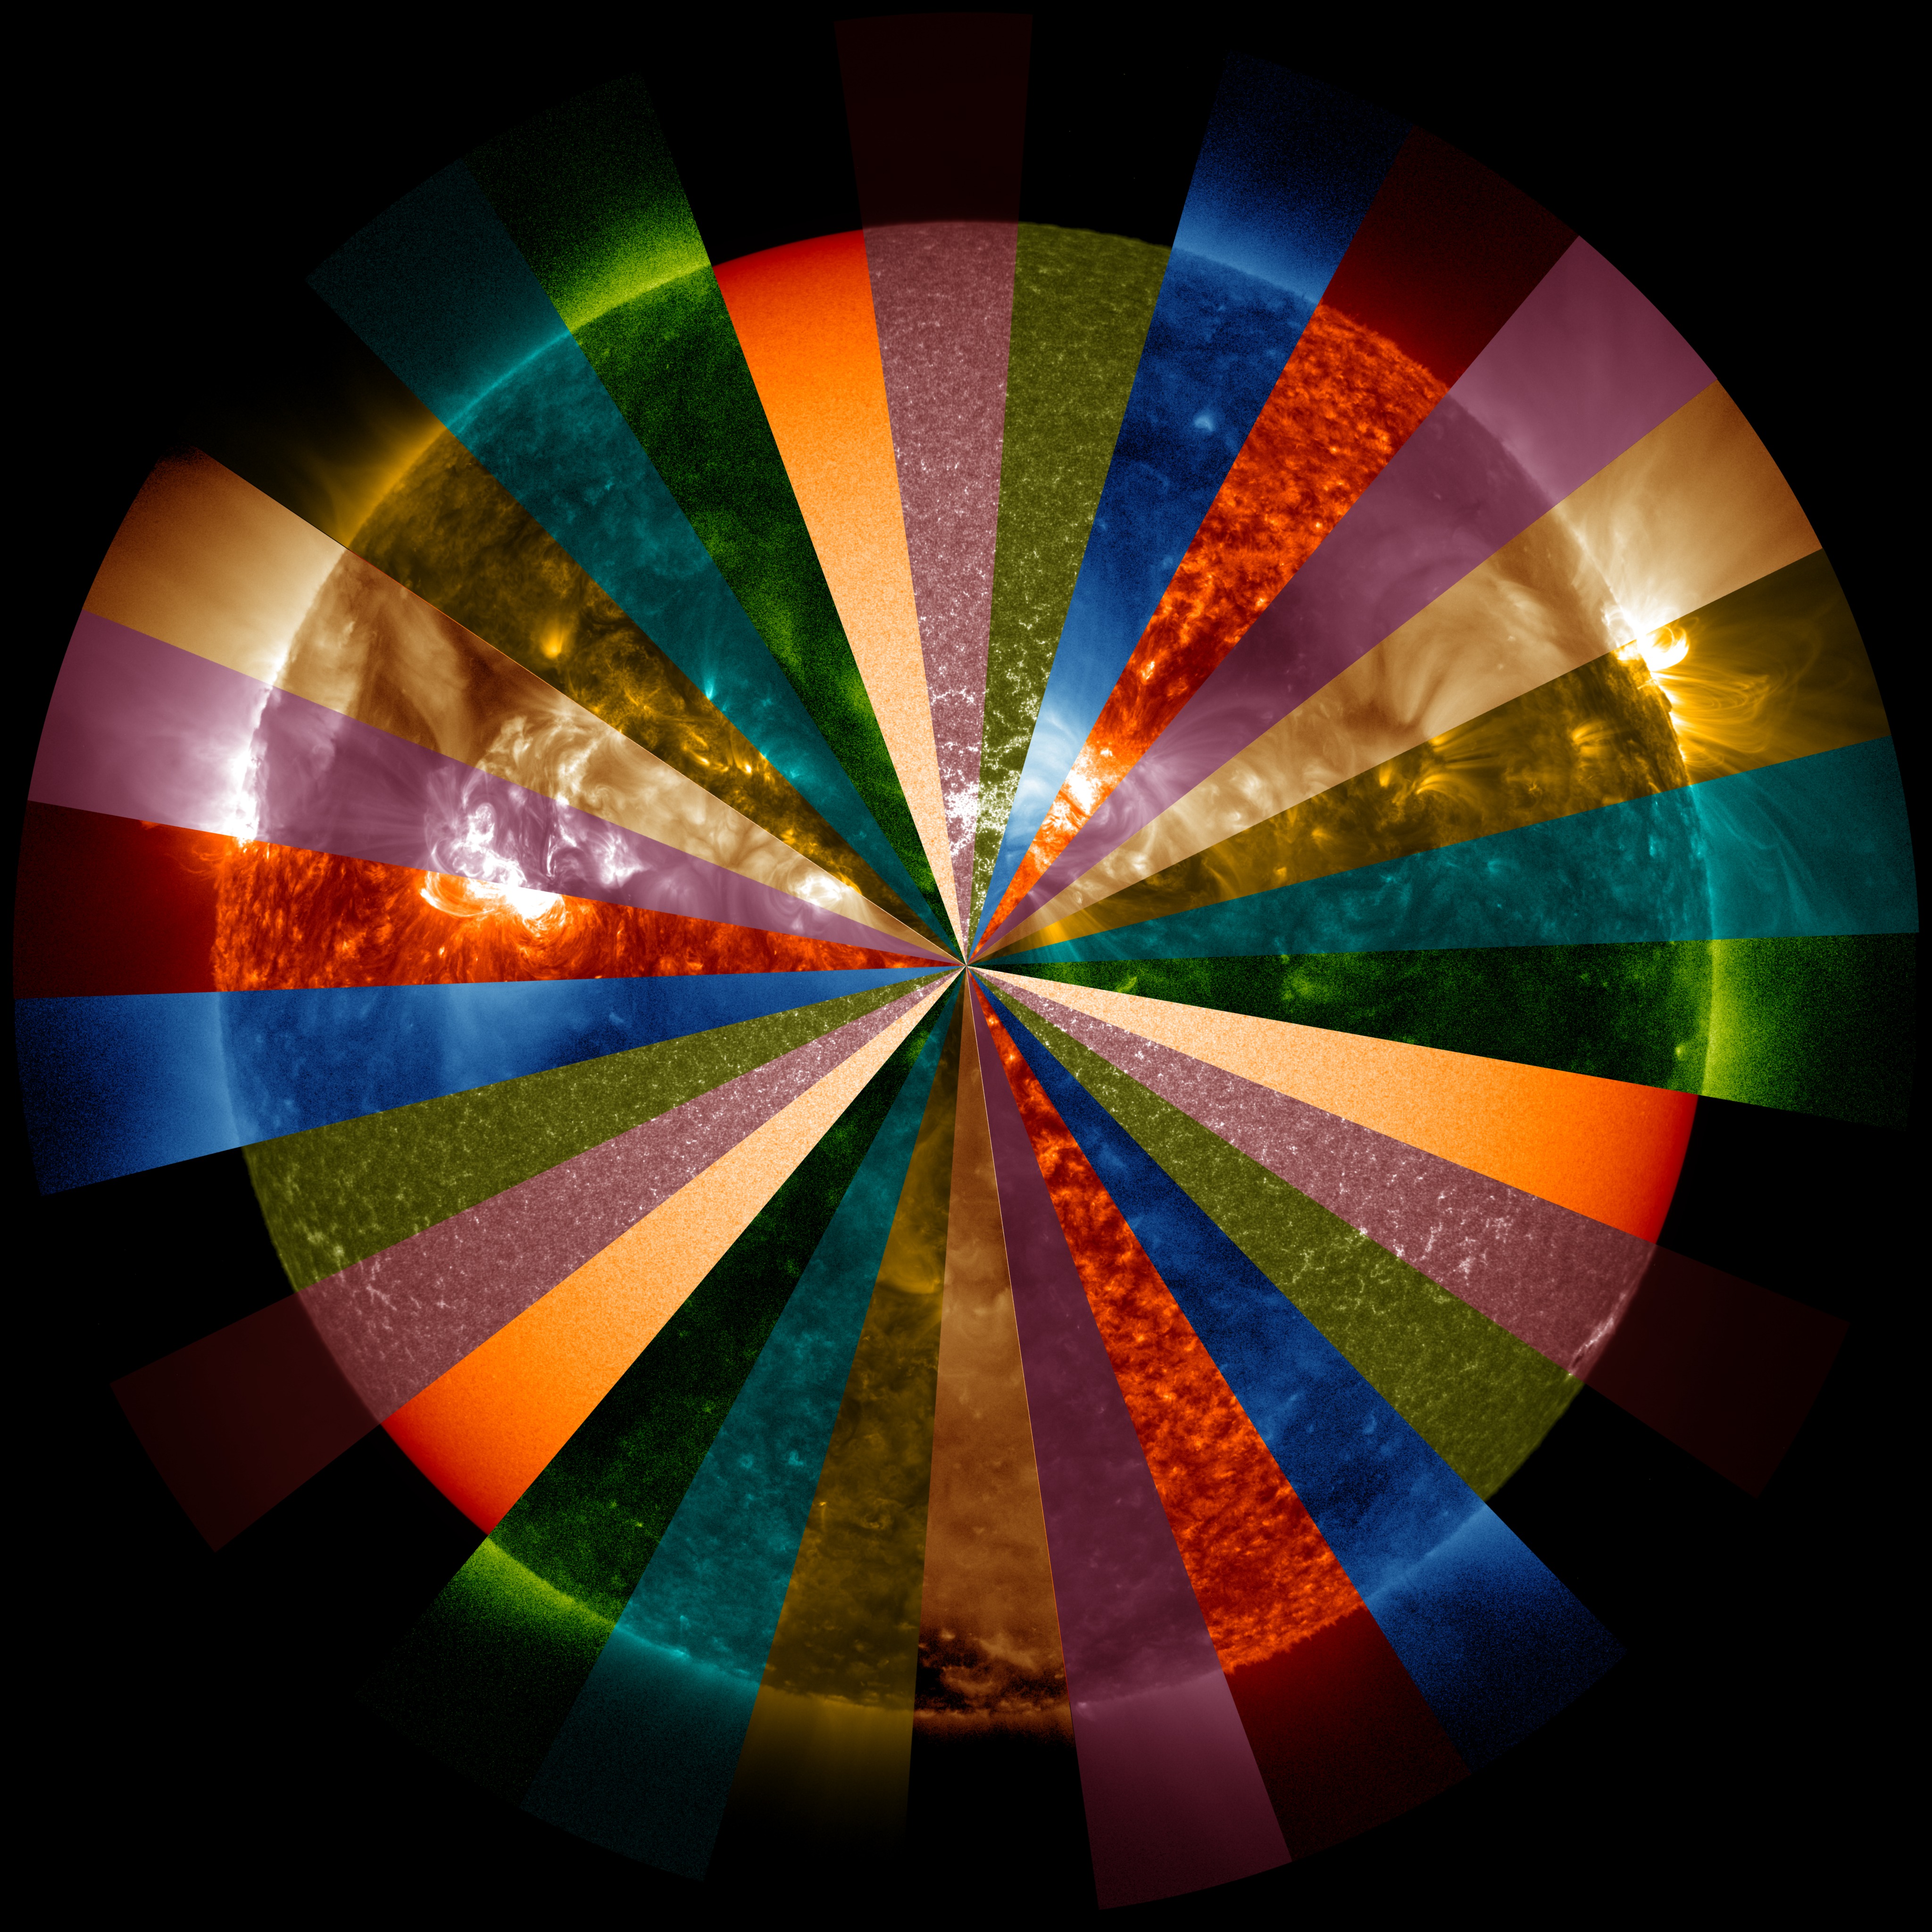 slices of the Sun in multiple wavelengths